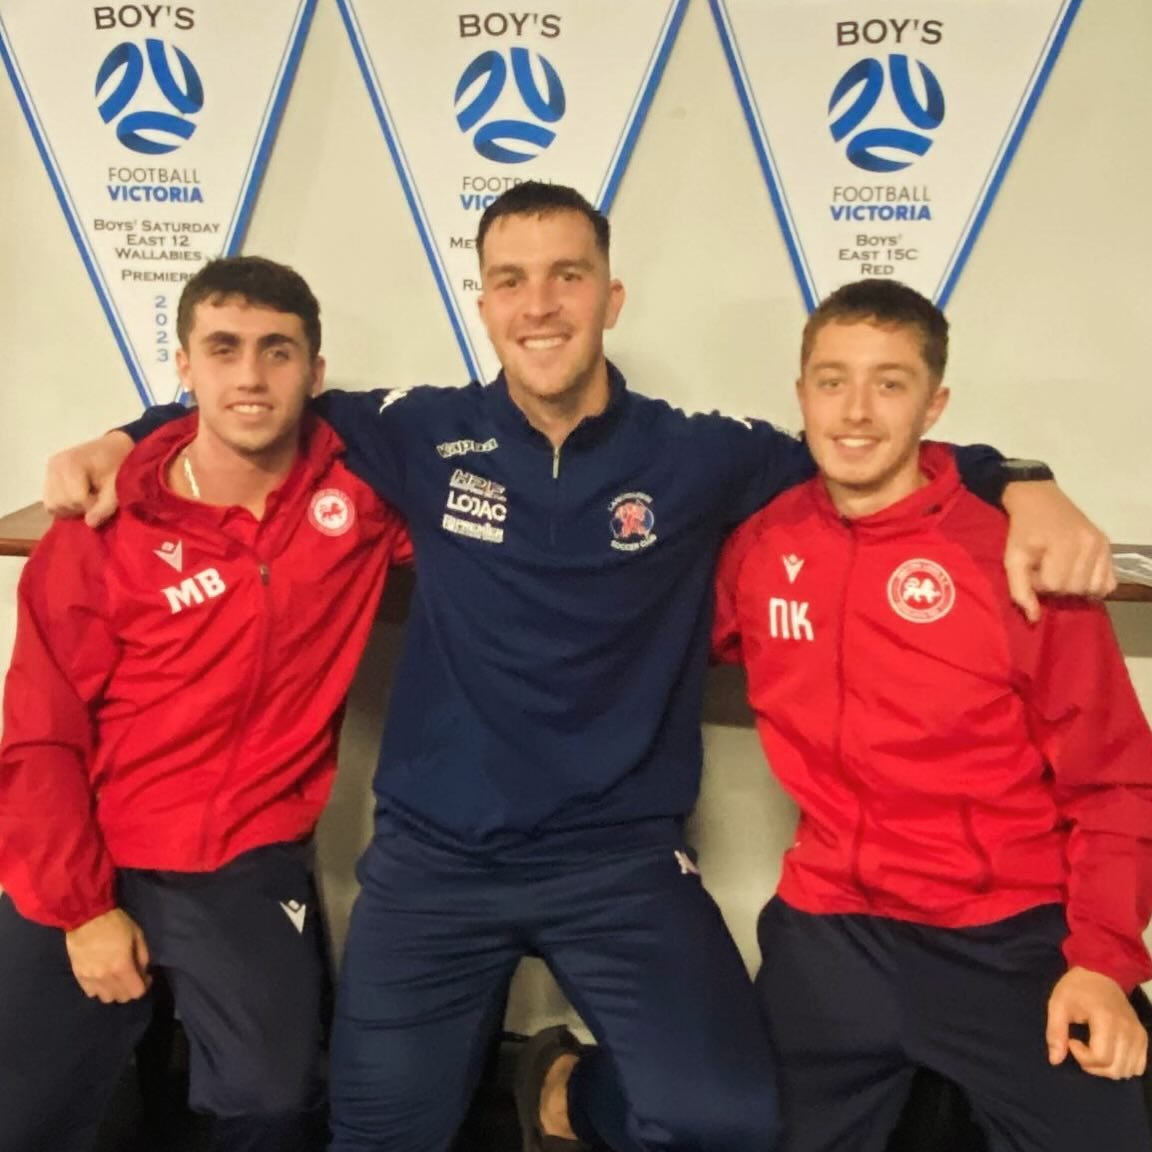 BBFC graduates went head to head today with Milo and Nicky repping Eastern Lions, and Griff stopping shots for Langwarrin in the Victorian Premier League 1 🤝